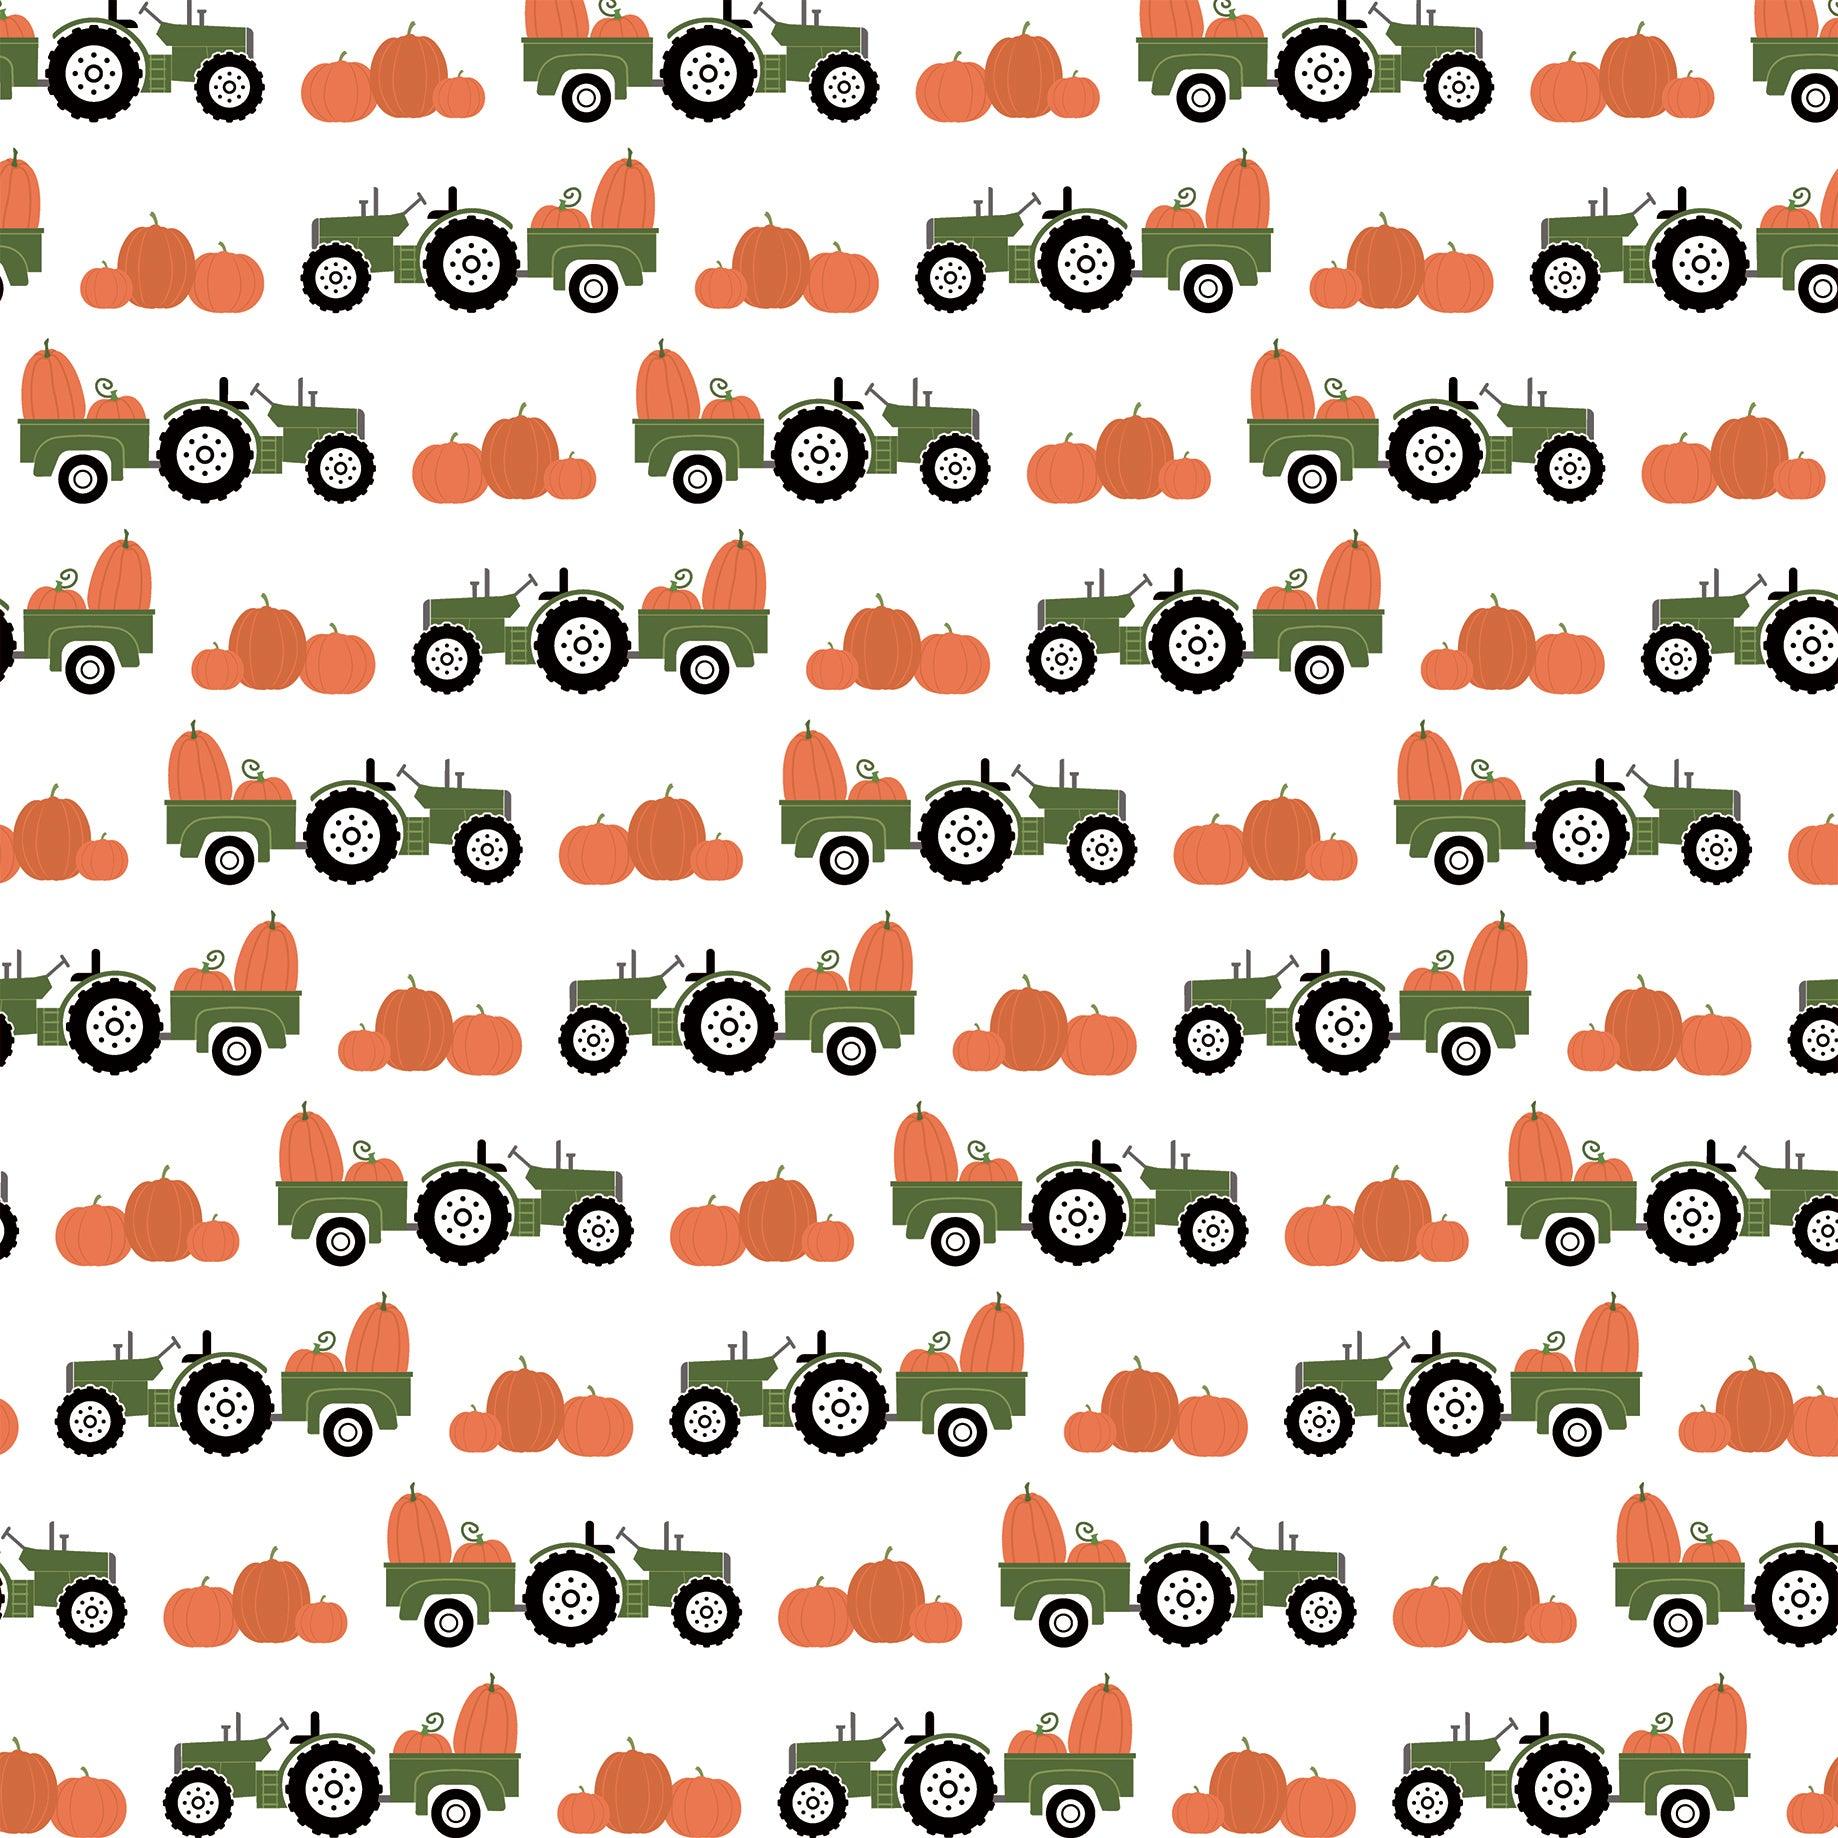 I Love Fall Collection Pumpkin Patch 12 x 12 Double-Sided Scrapbook Paper by Echo Park Paper - Scrapbook Supply Companies